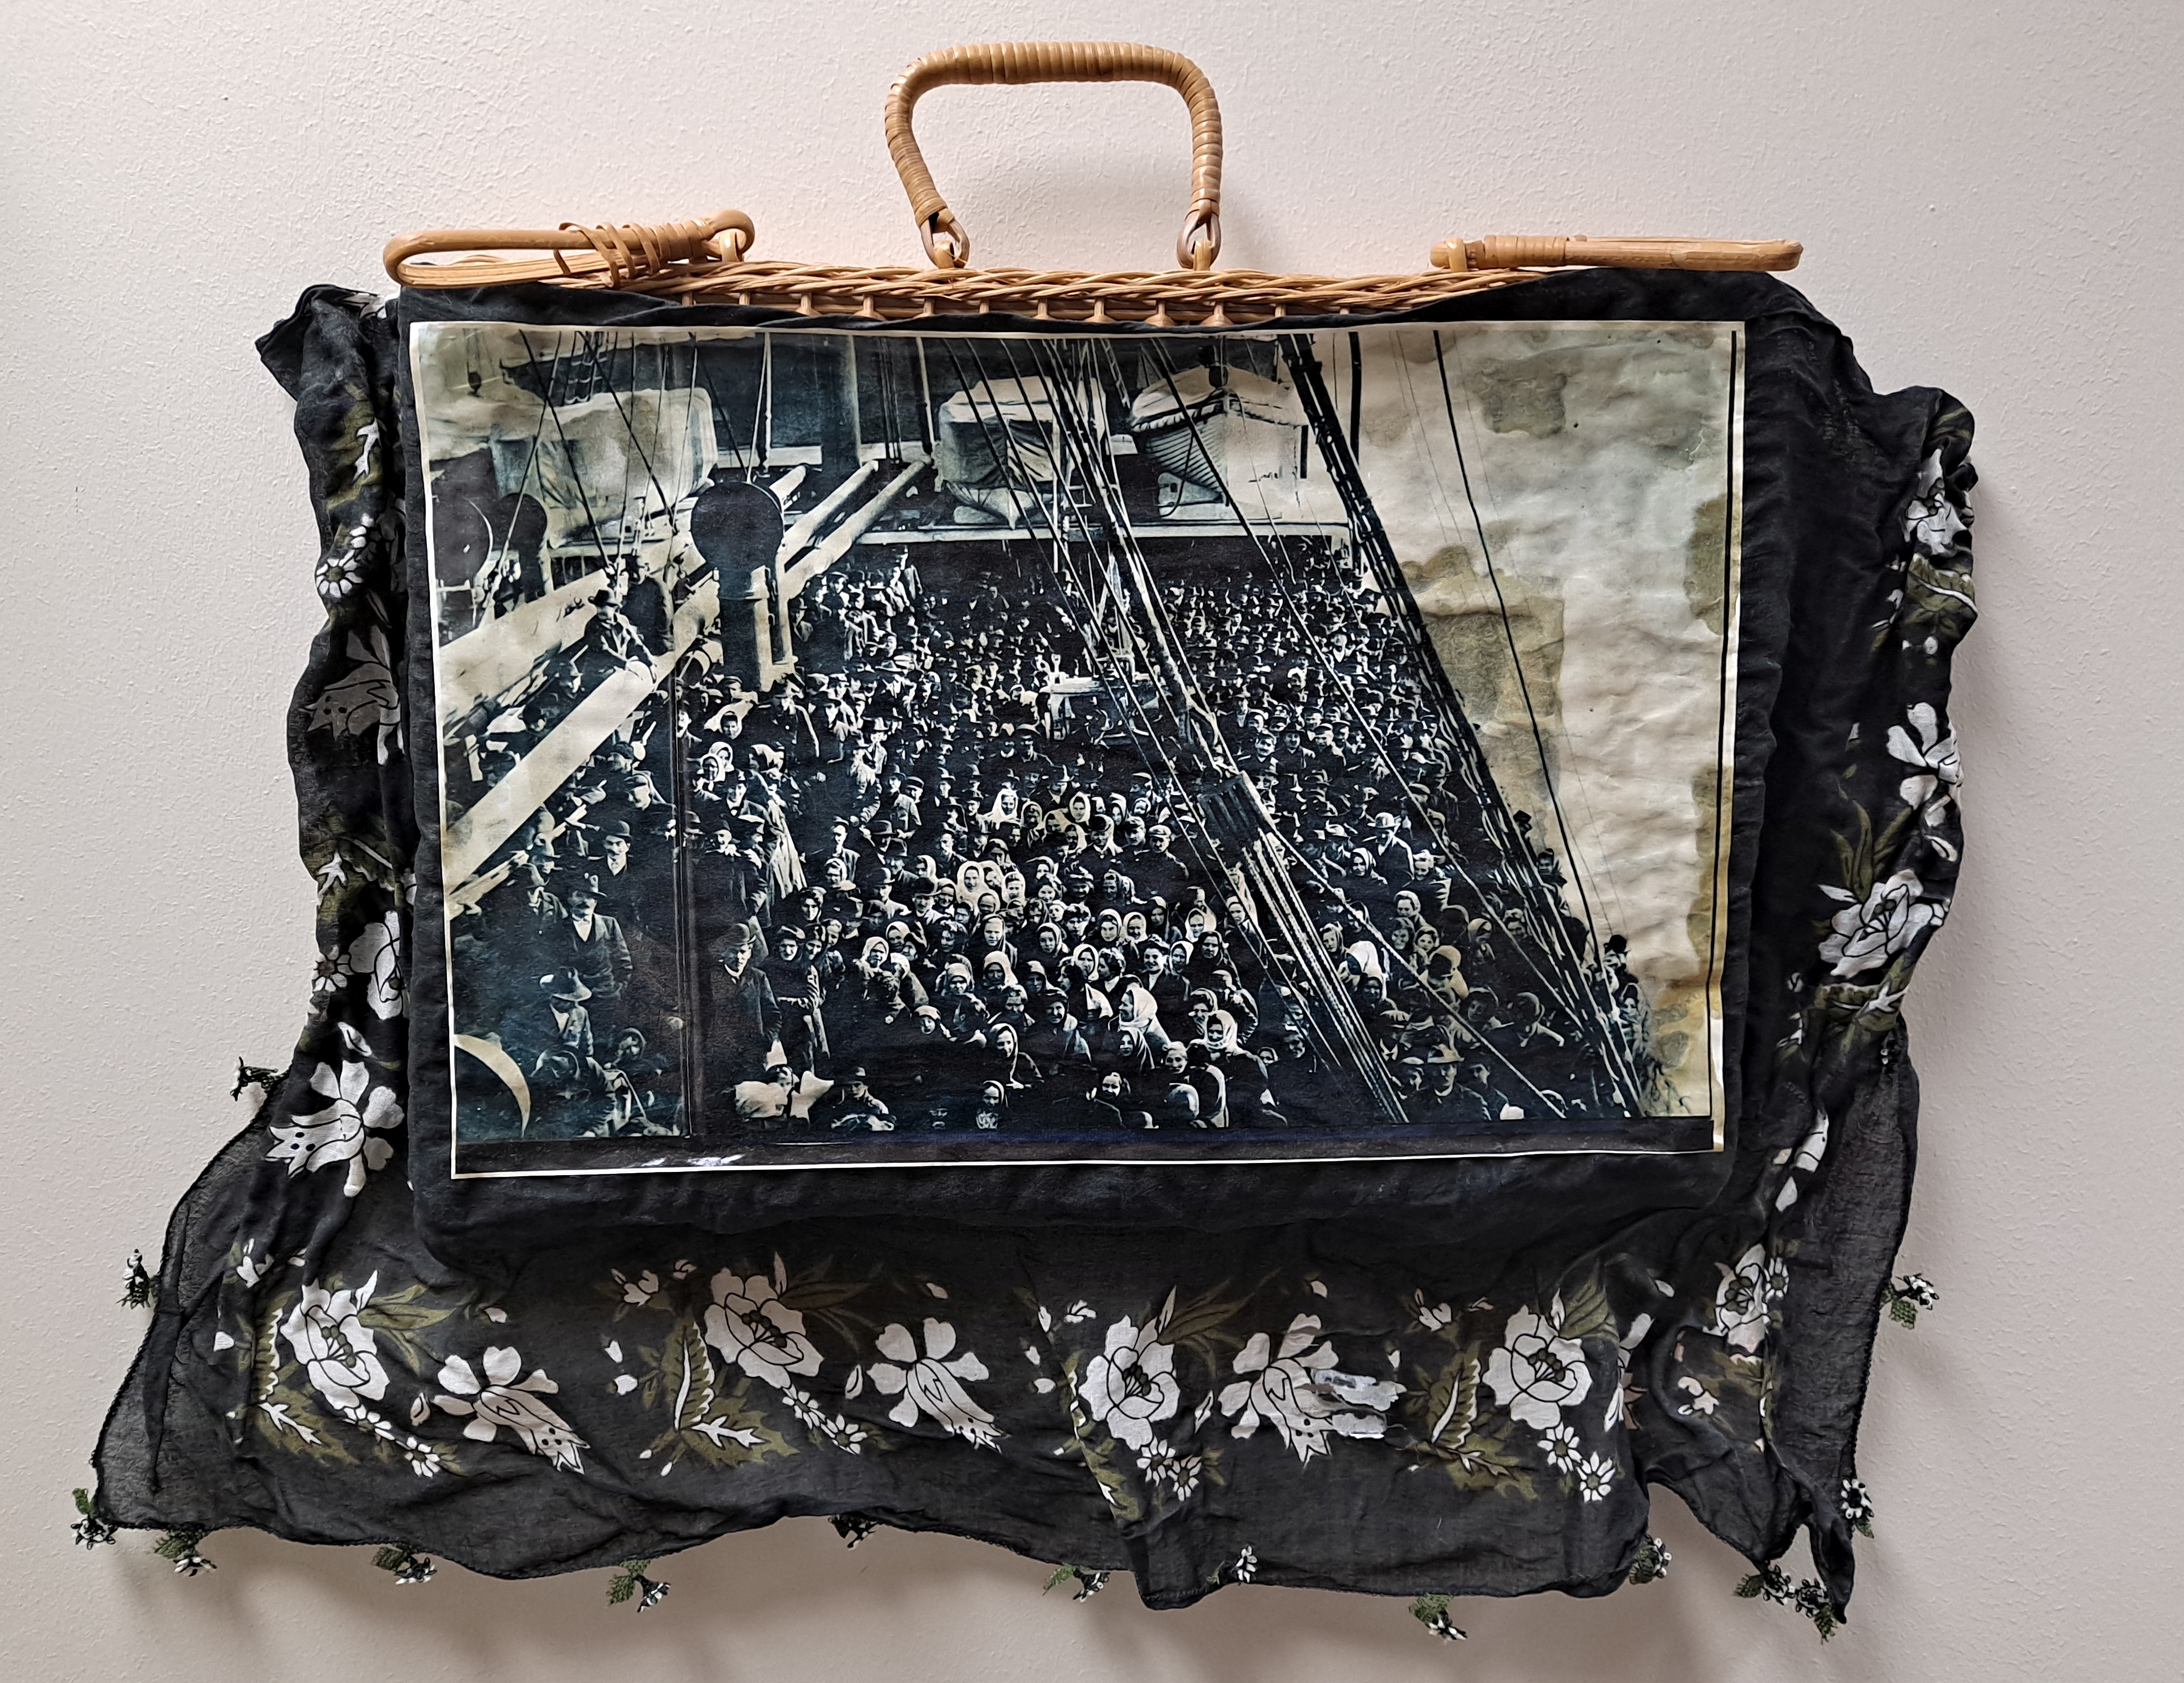 Photograph of wicker suitcase with old photograph of immigrants on it and cloth around it